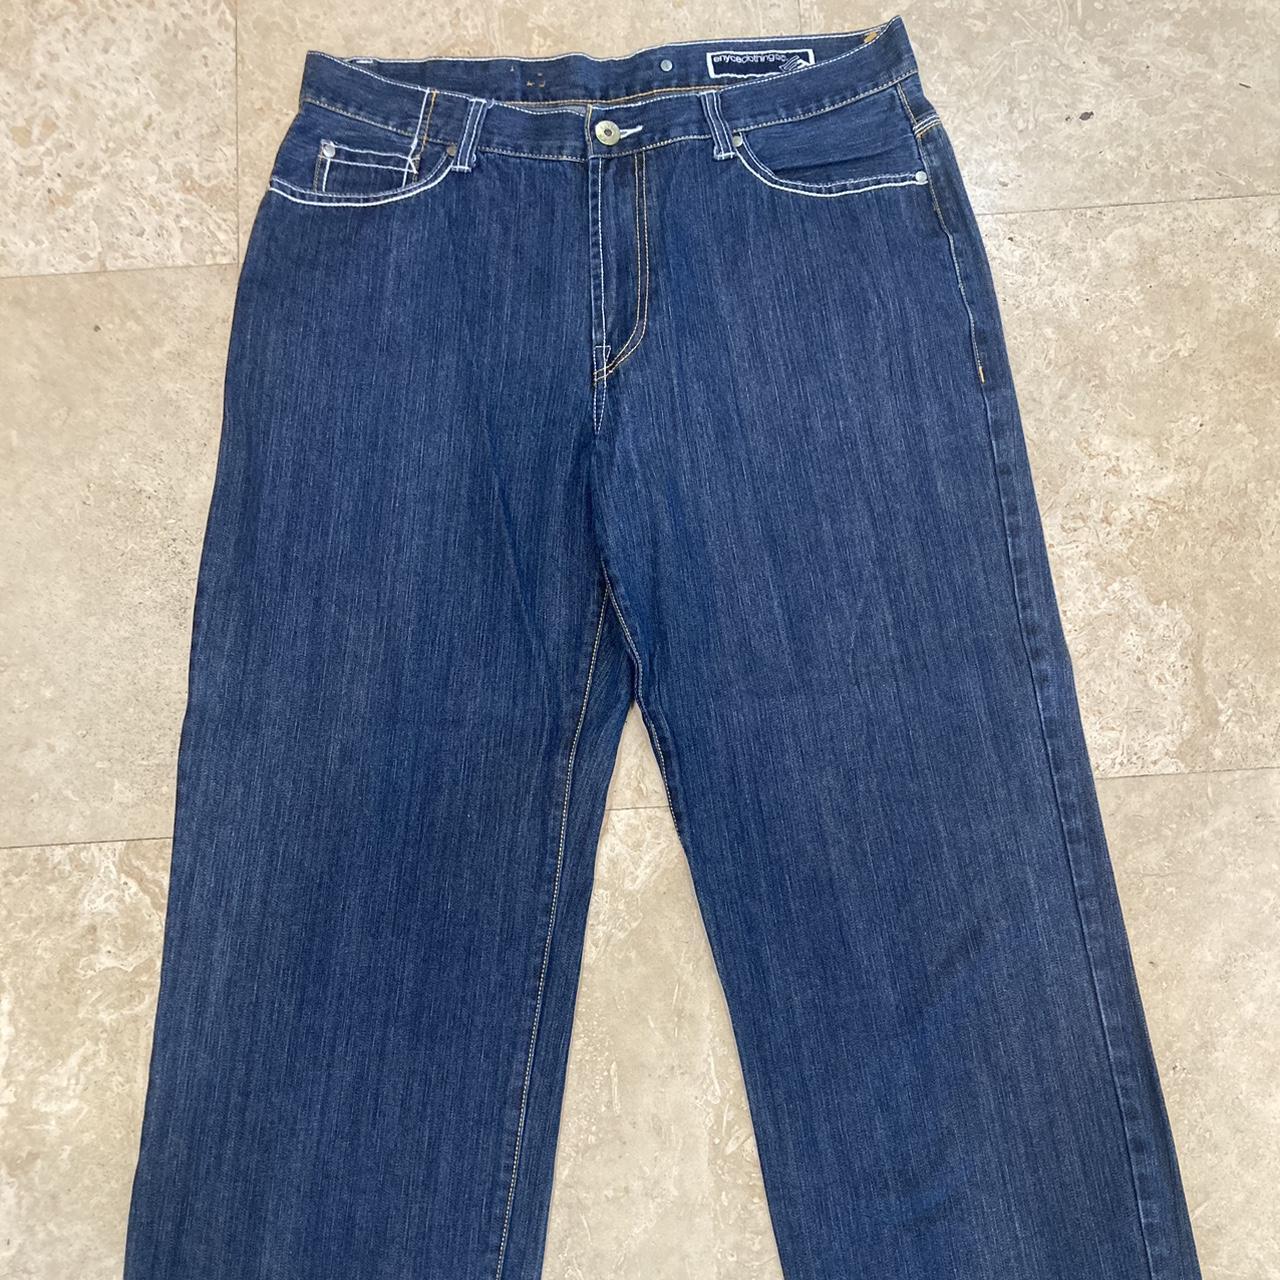 Late 2000’s ENYCE Blue Jeans 🔹 Price: $45 🔹 Size:... - Depop